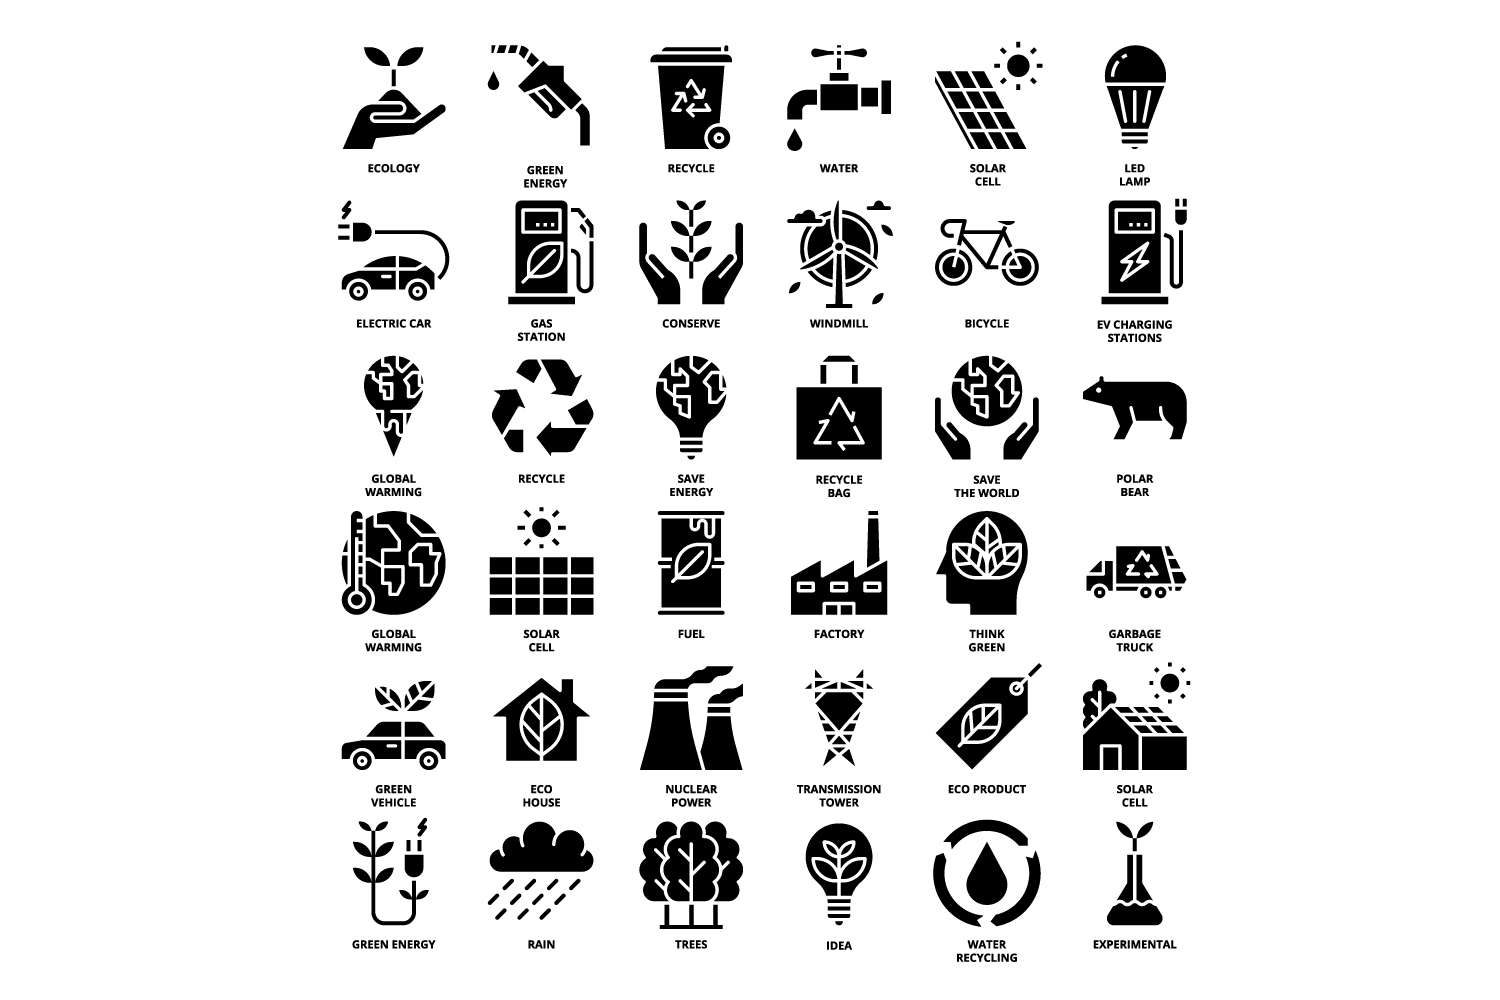 Black and white image of various icons.